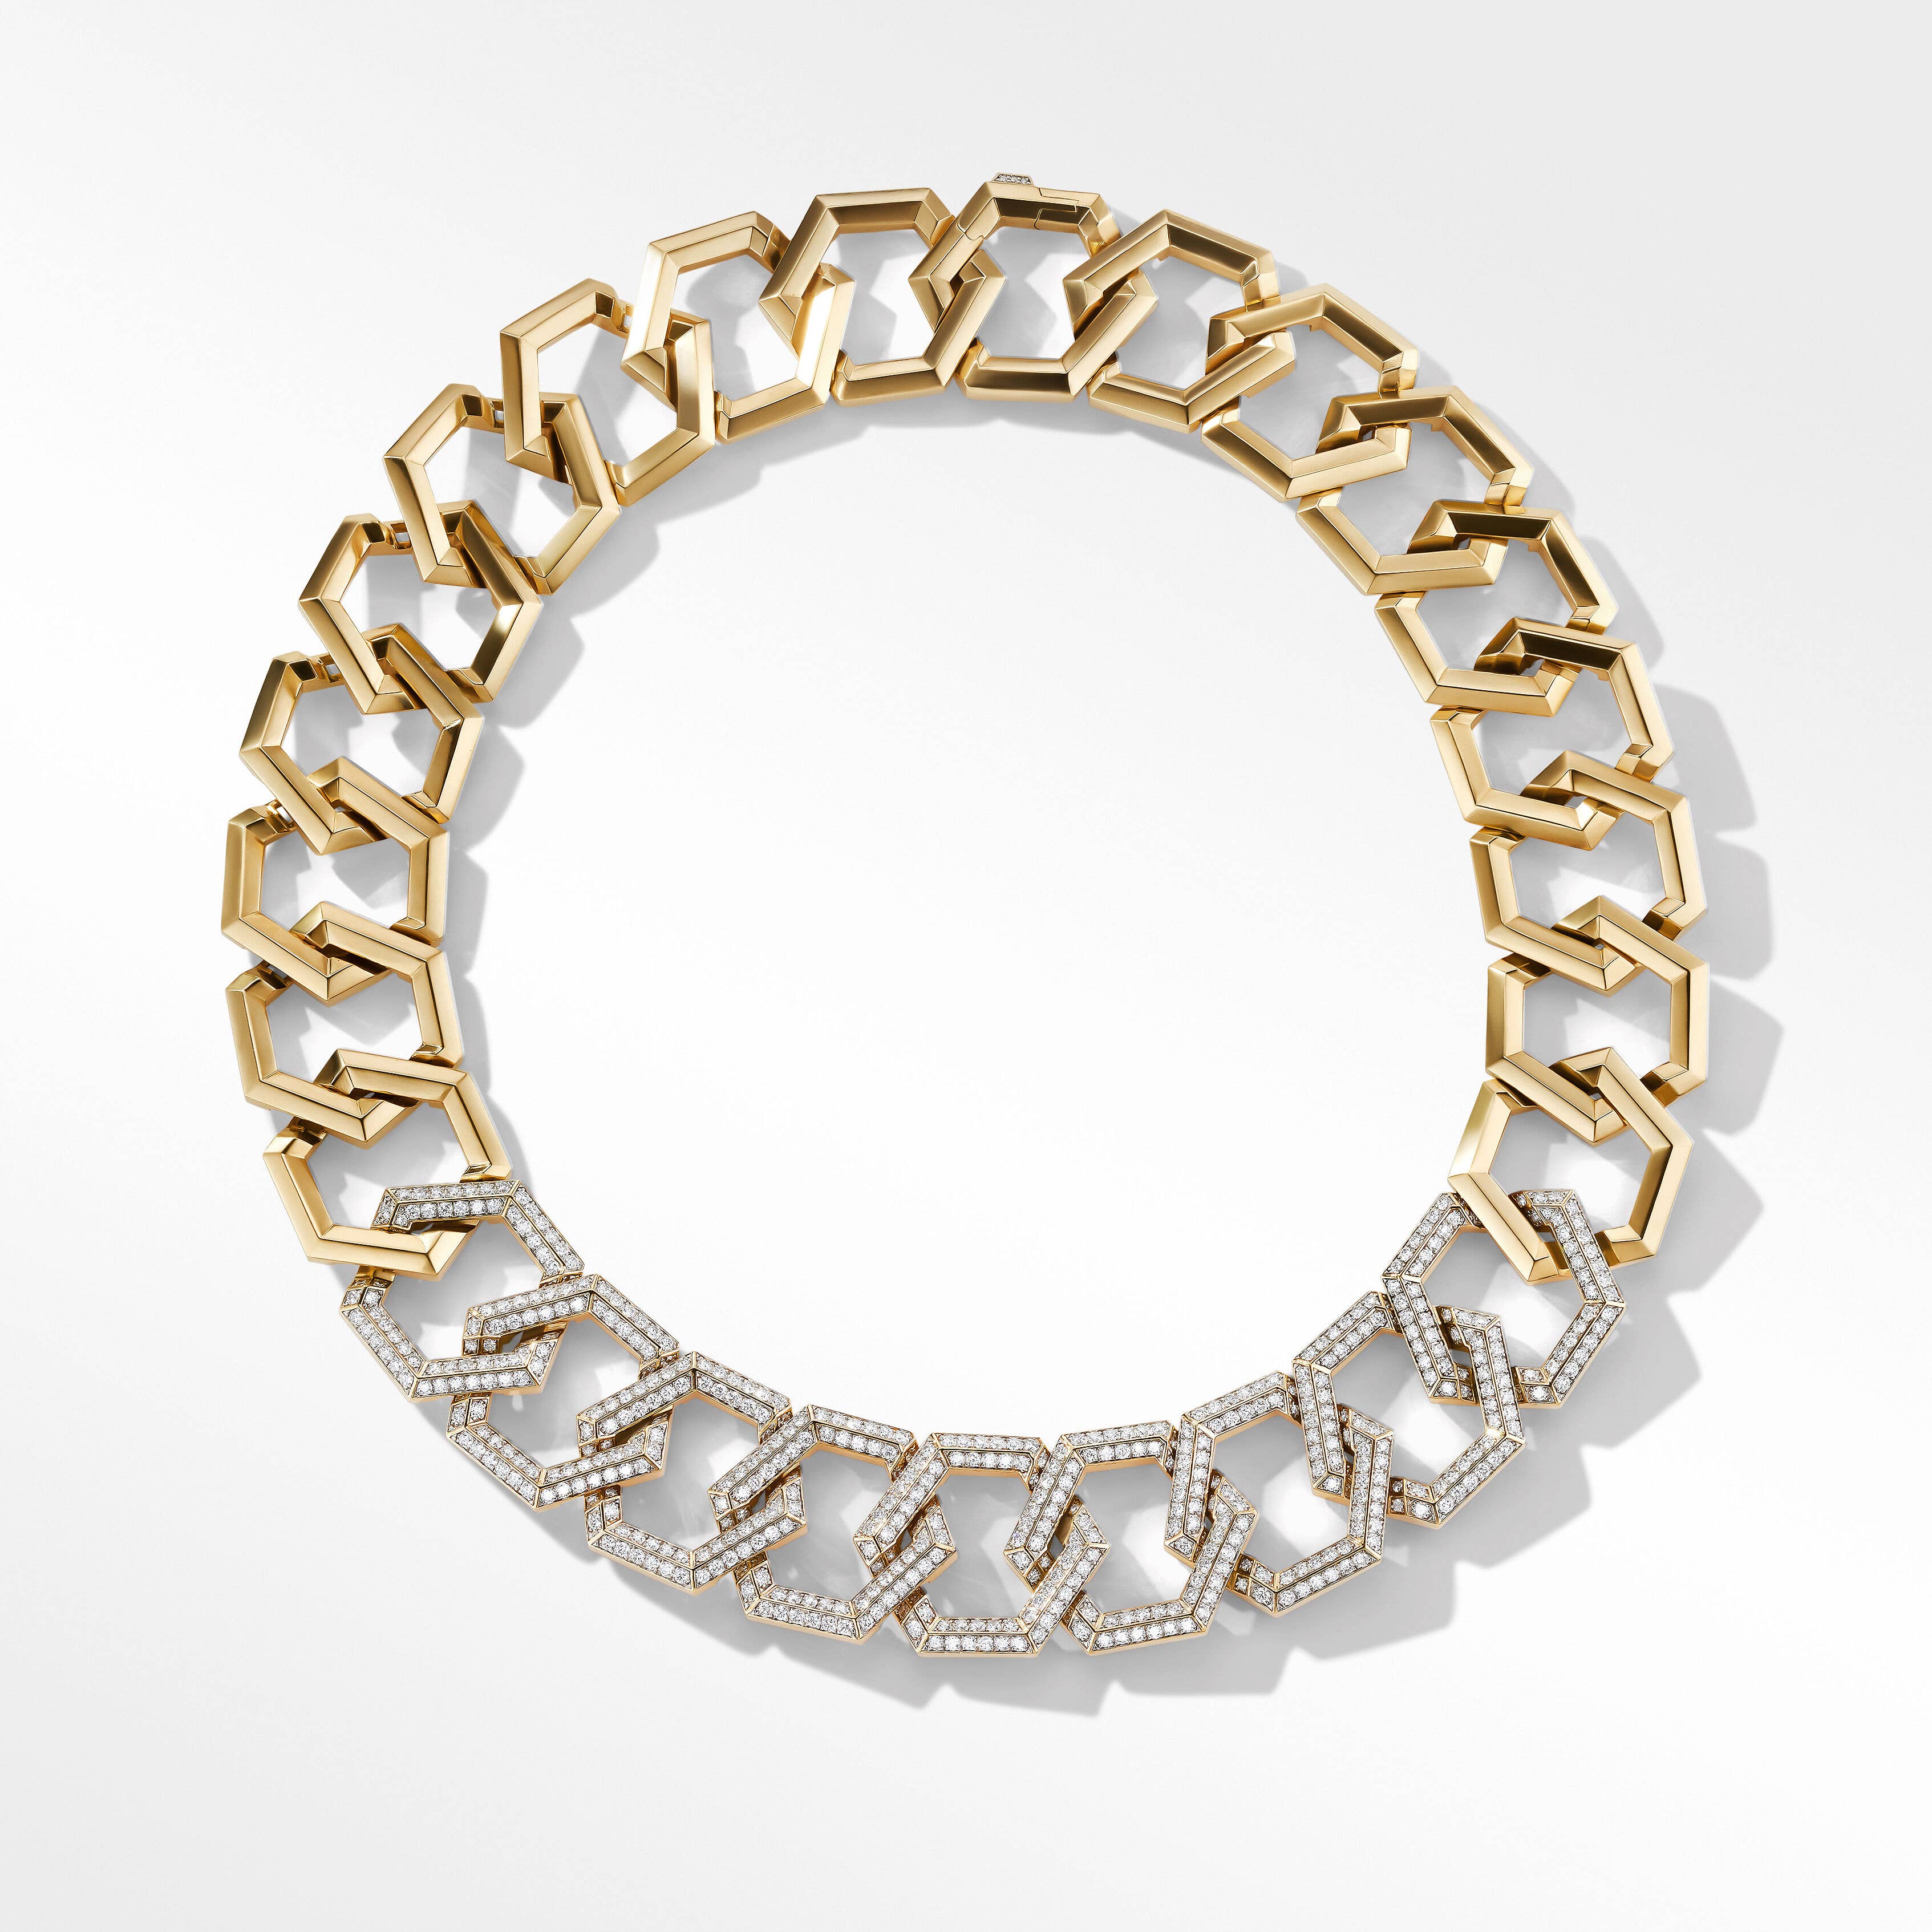 Carlyle™ Necklace in 18K Yellow Gold with Pavé Diamonds